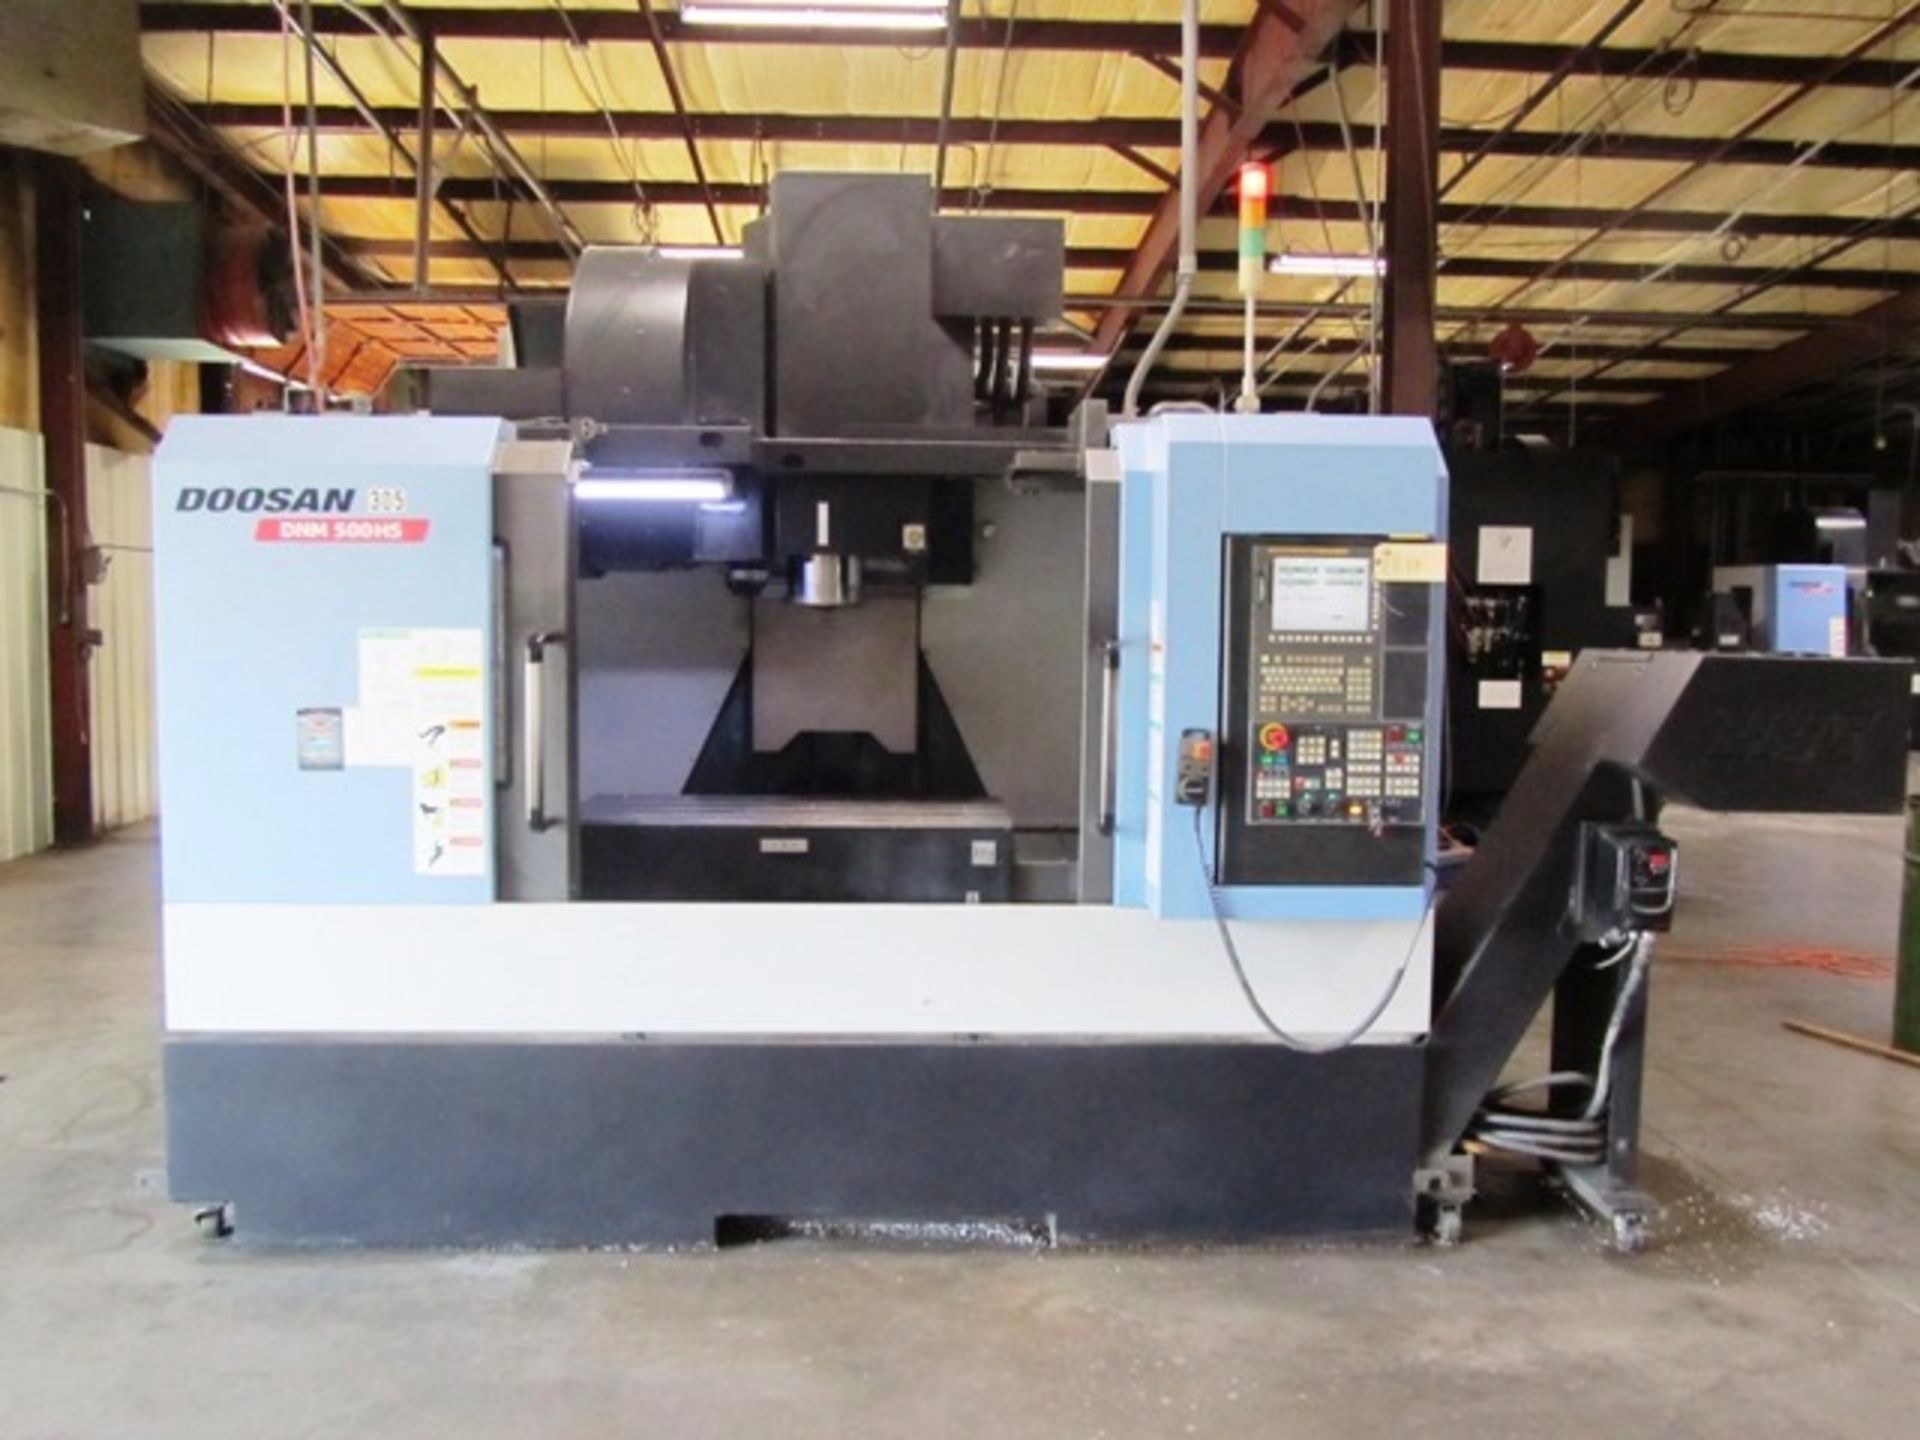 Doosan DNM 500HS Vertical Machining Center with 21'' x 47'' Worktable, #40 Taper Spindle Speeds to